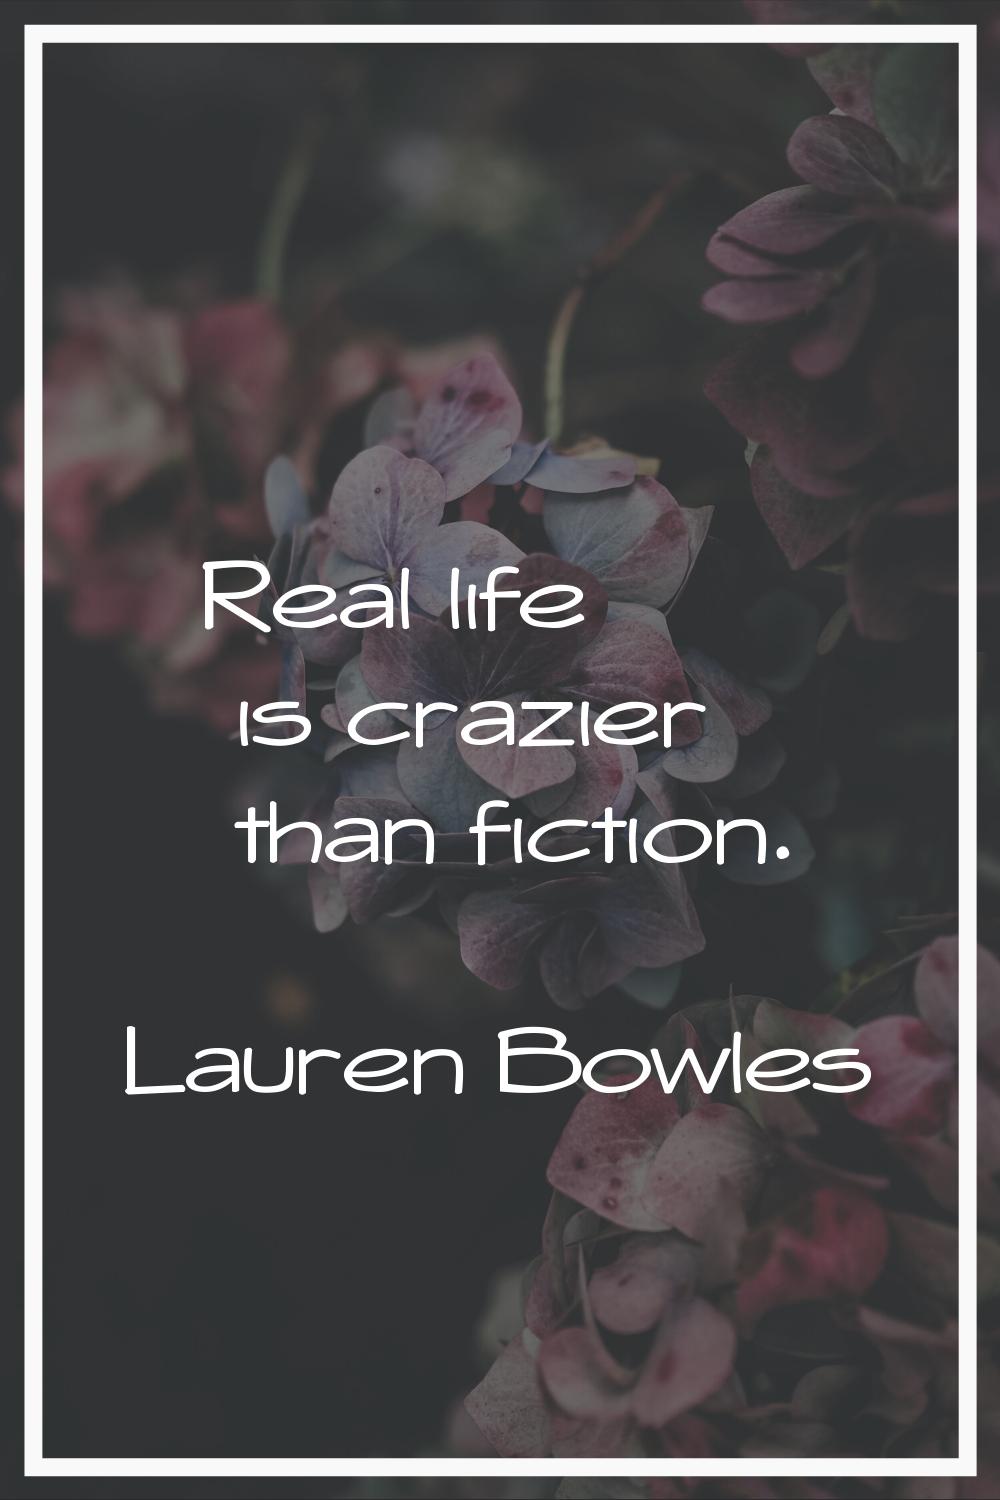 Real life is crazier than fiction.